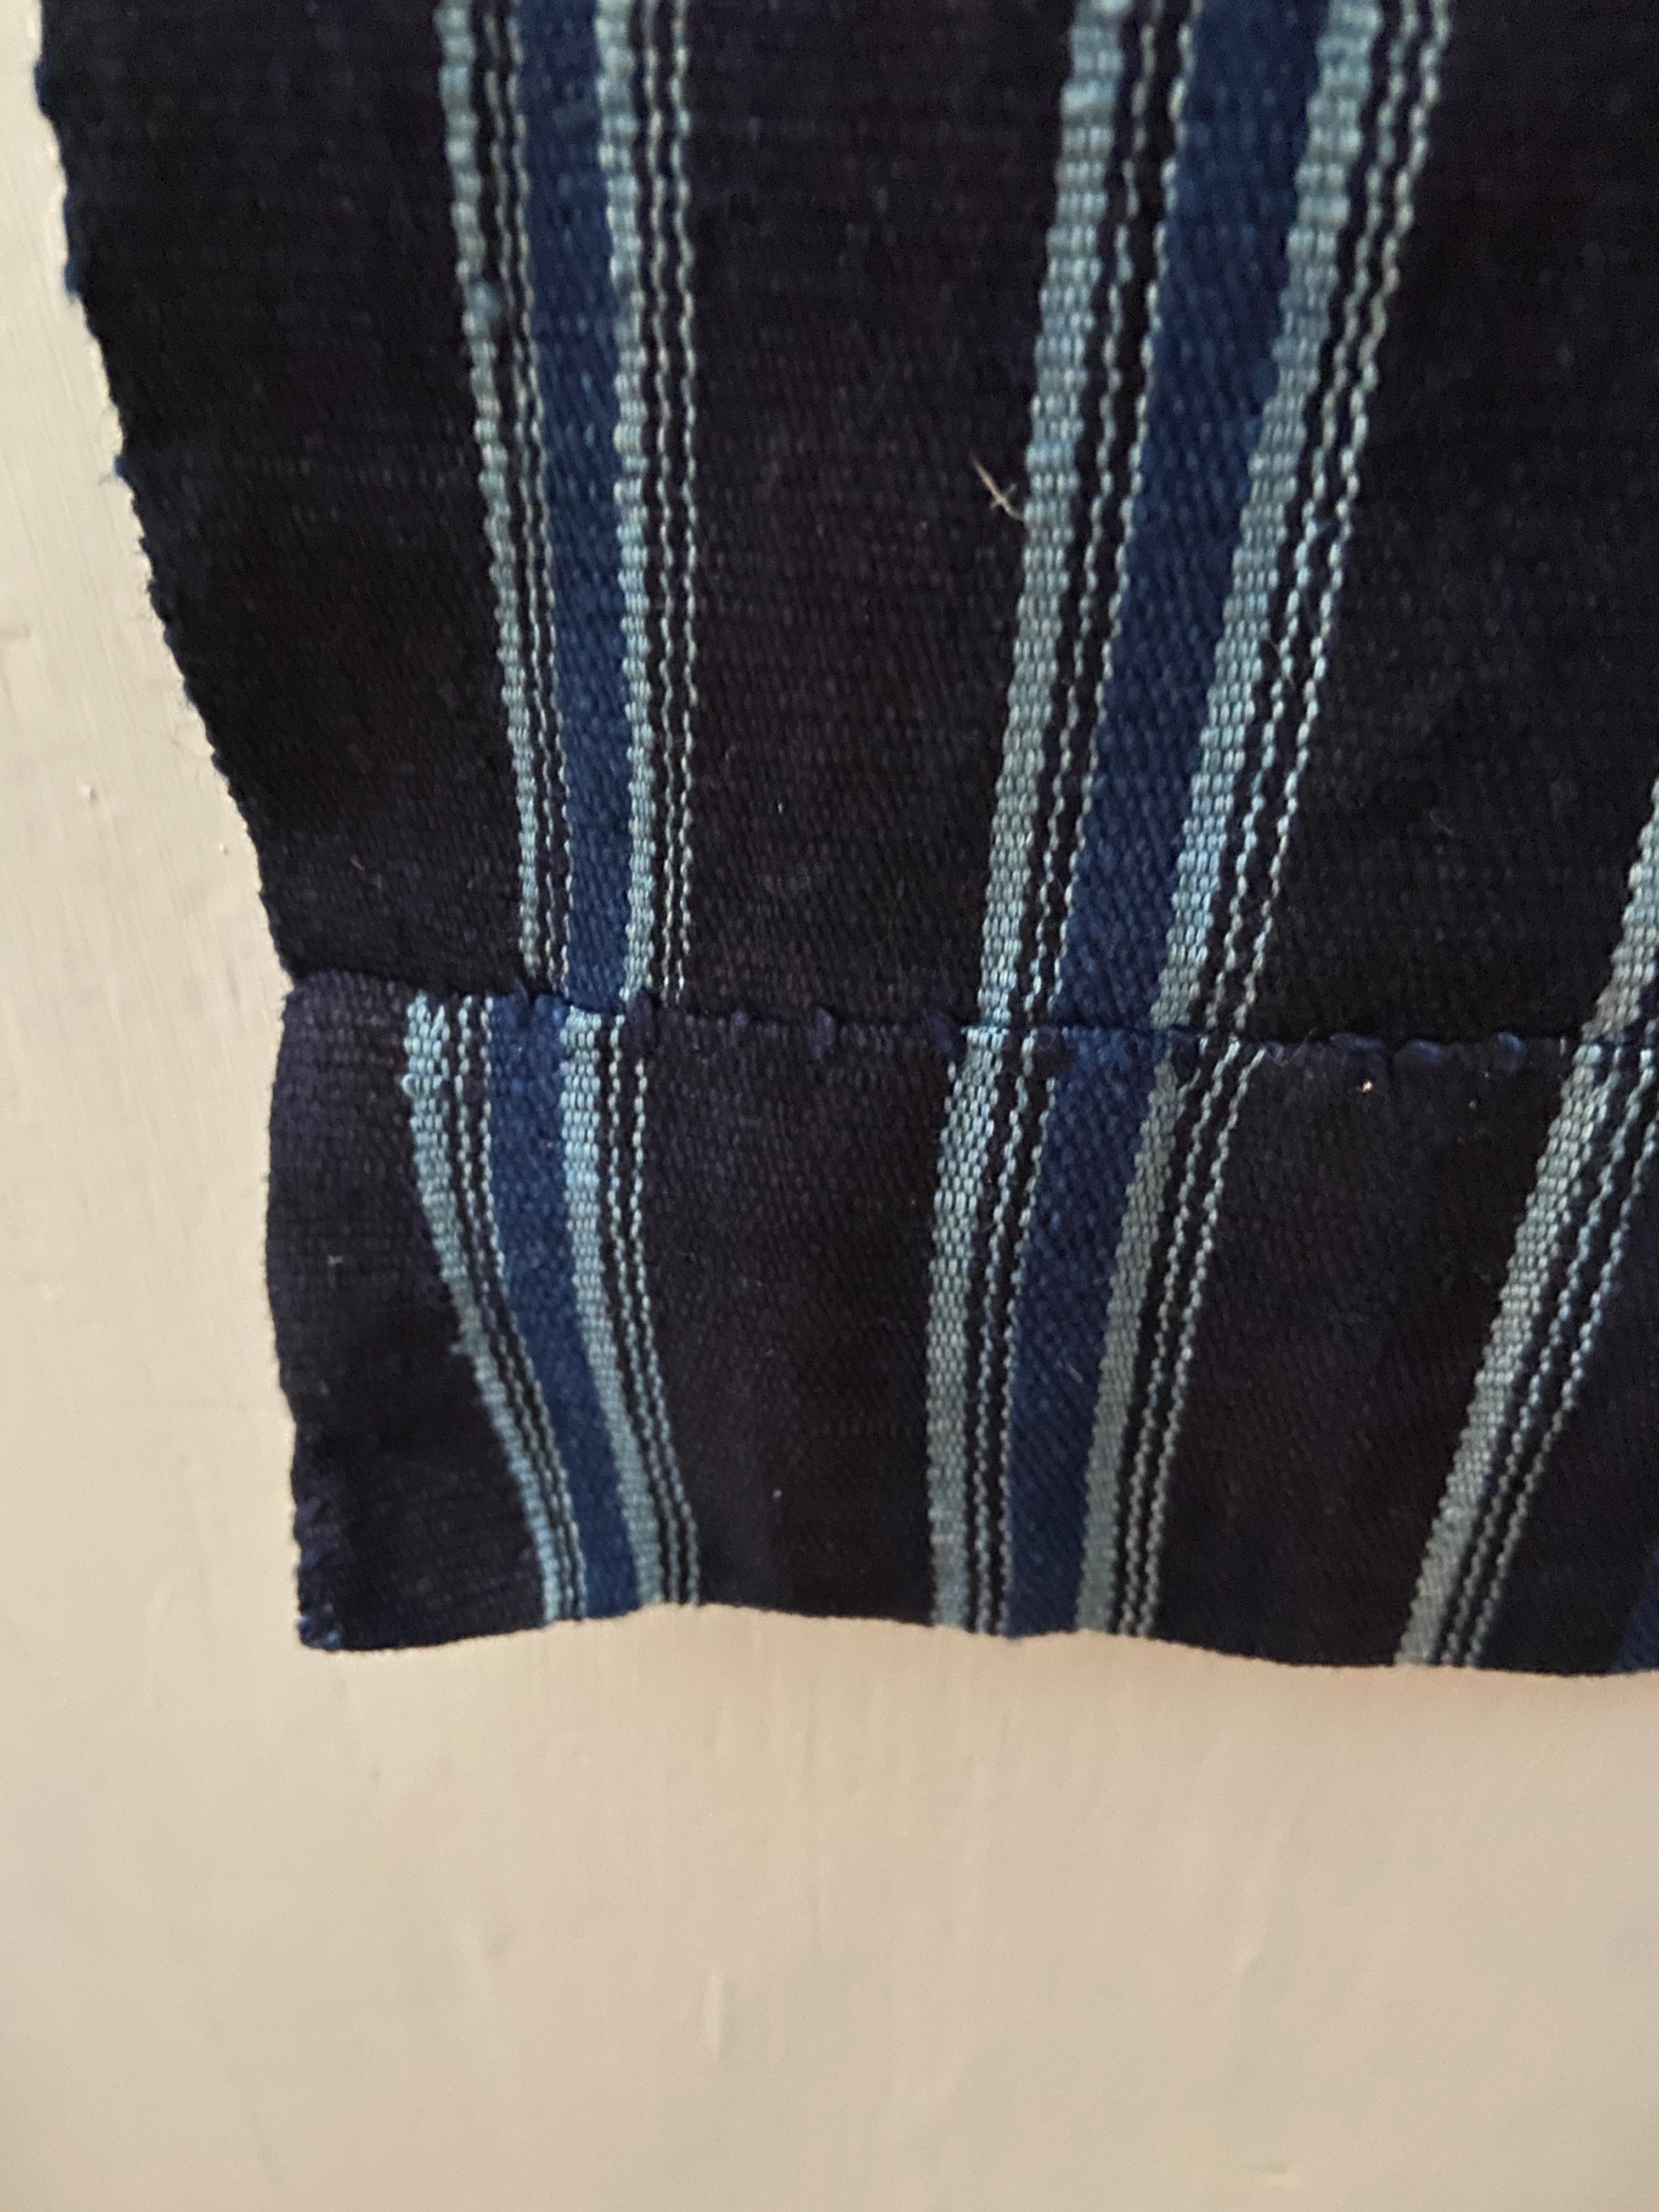 Textile Vintage Ikat Patterned Woman's Weave Wrapper Cloth in Indigo, Nigeria 1950's